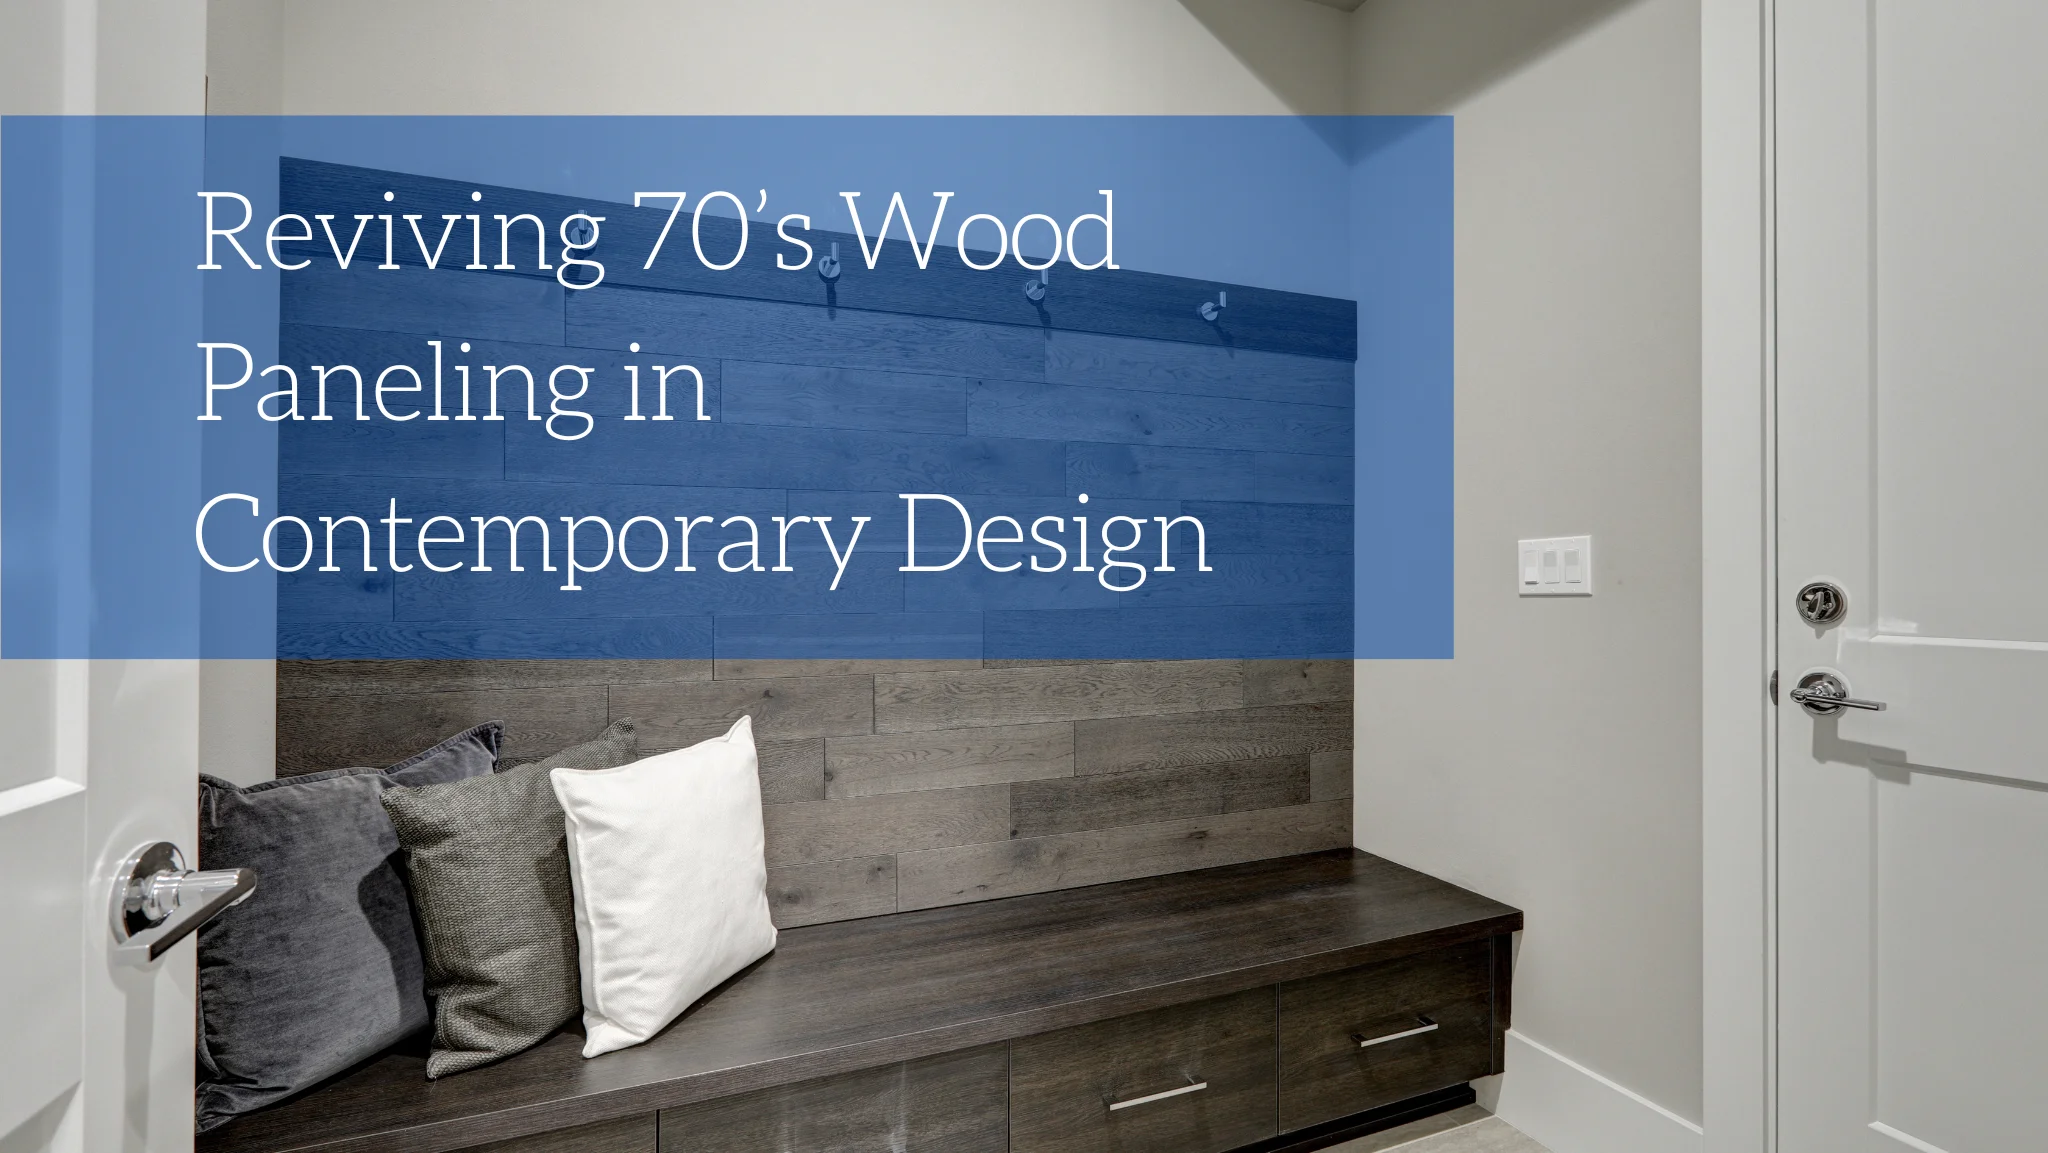 Reviving 70’s Wood Paneling in Contemporary Design